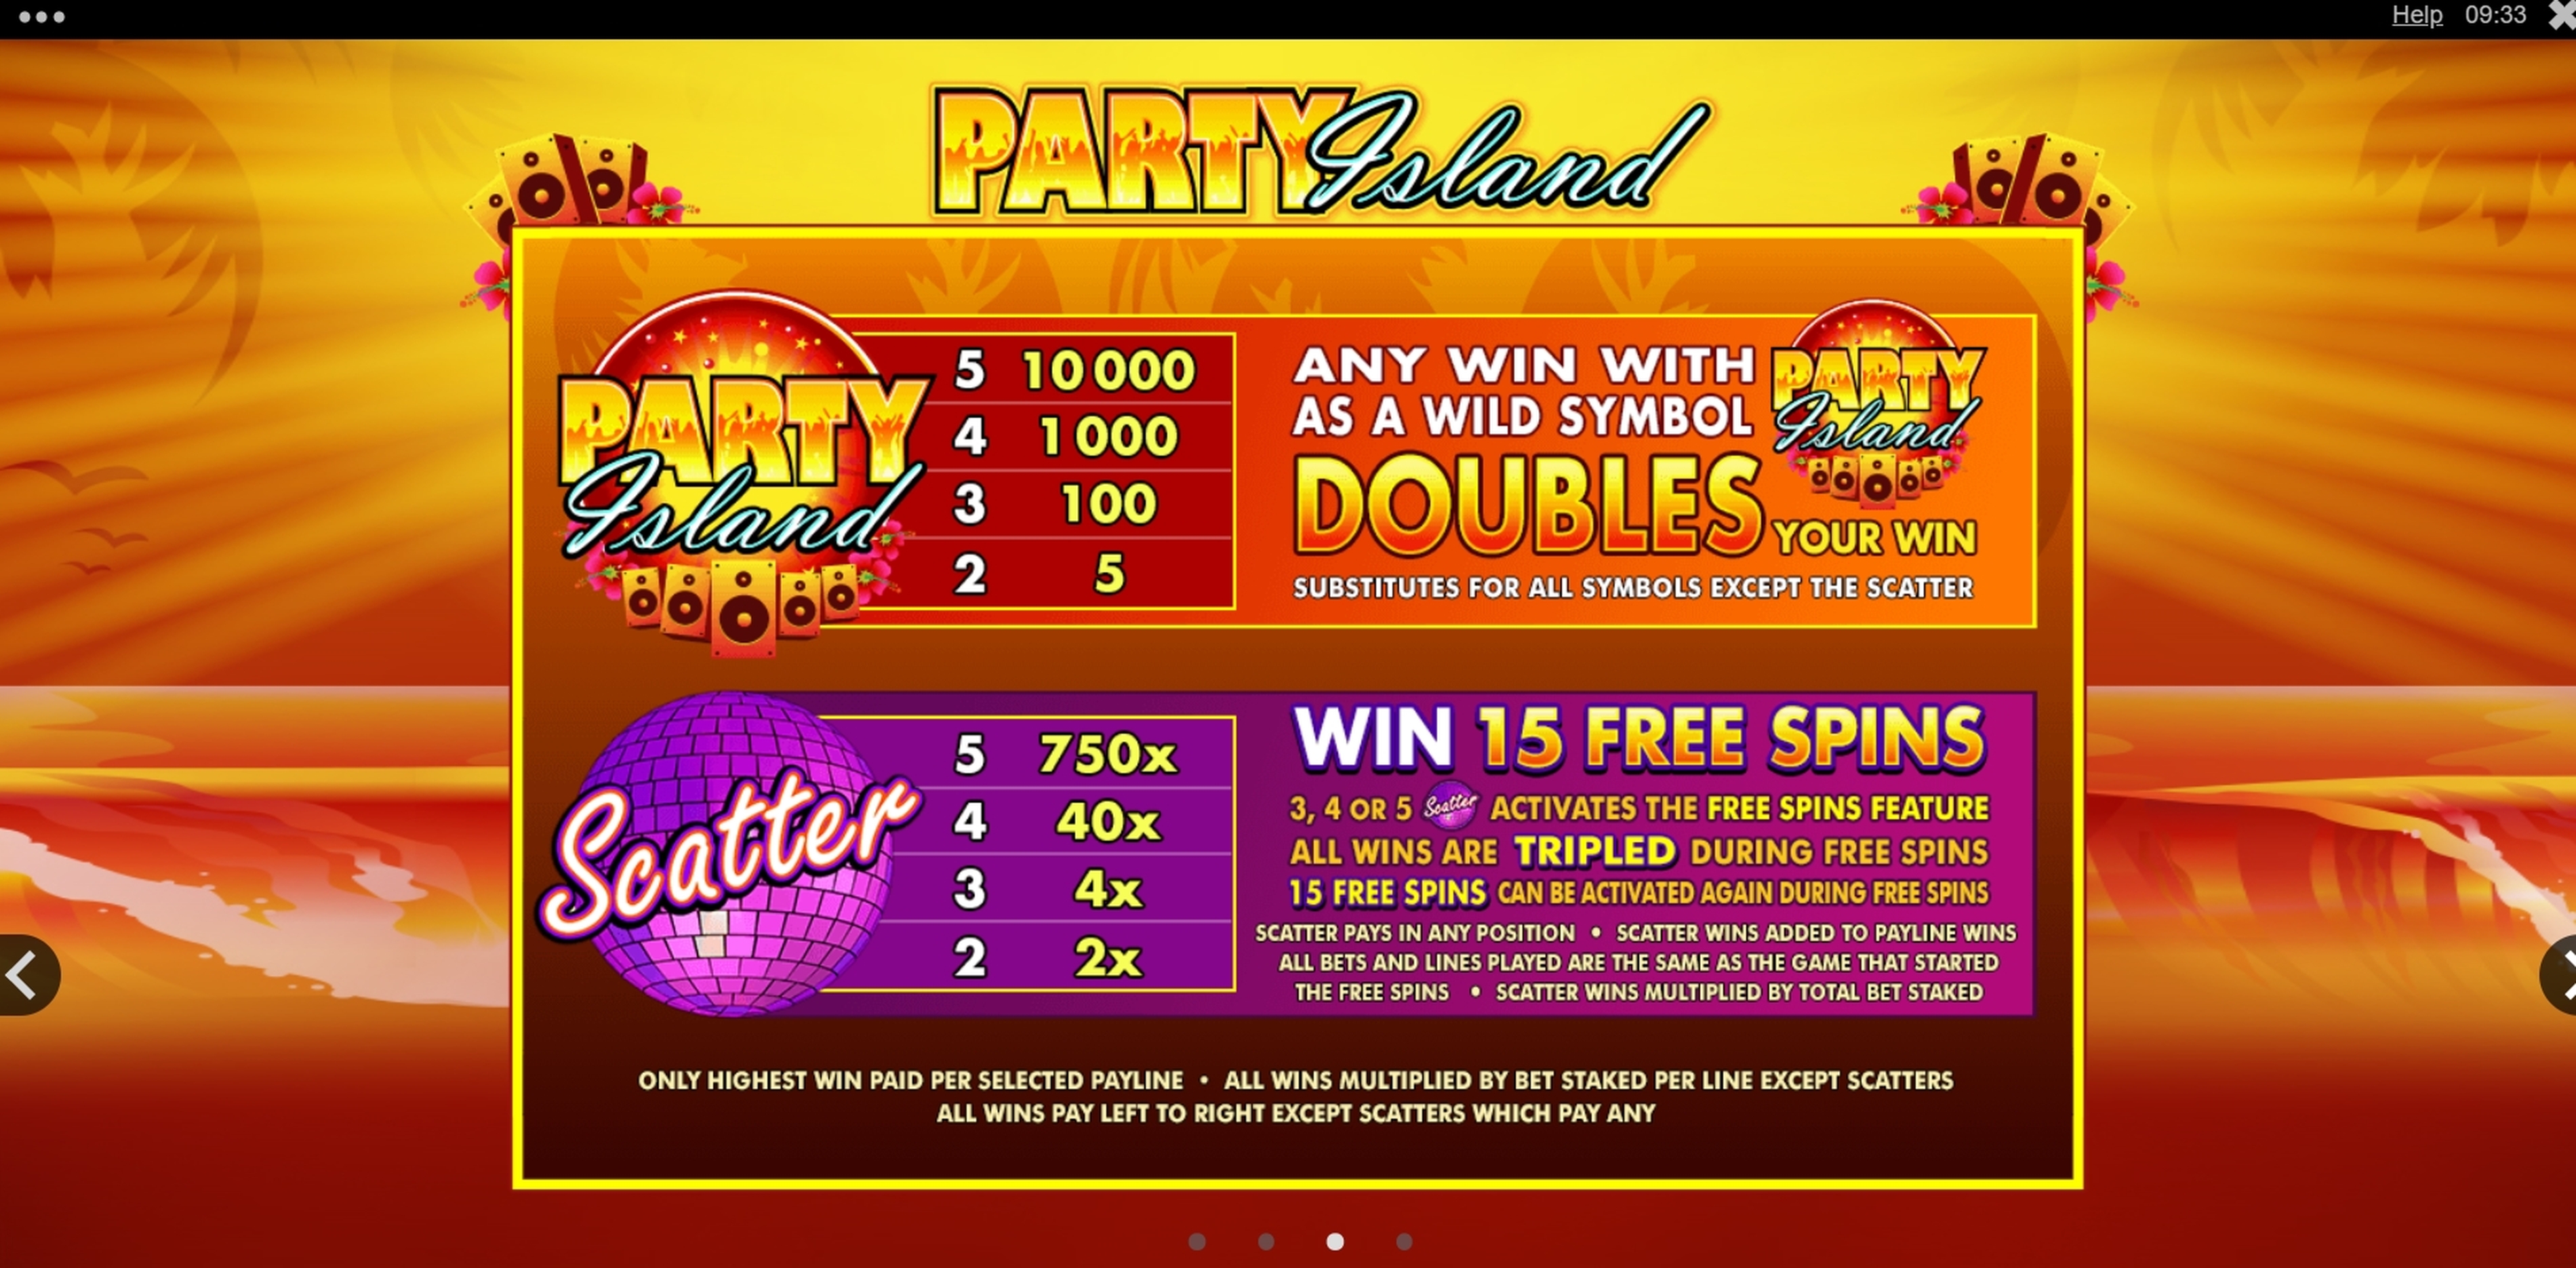 Info of Party Island Slot Game by Microgaming